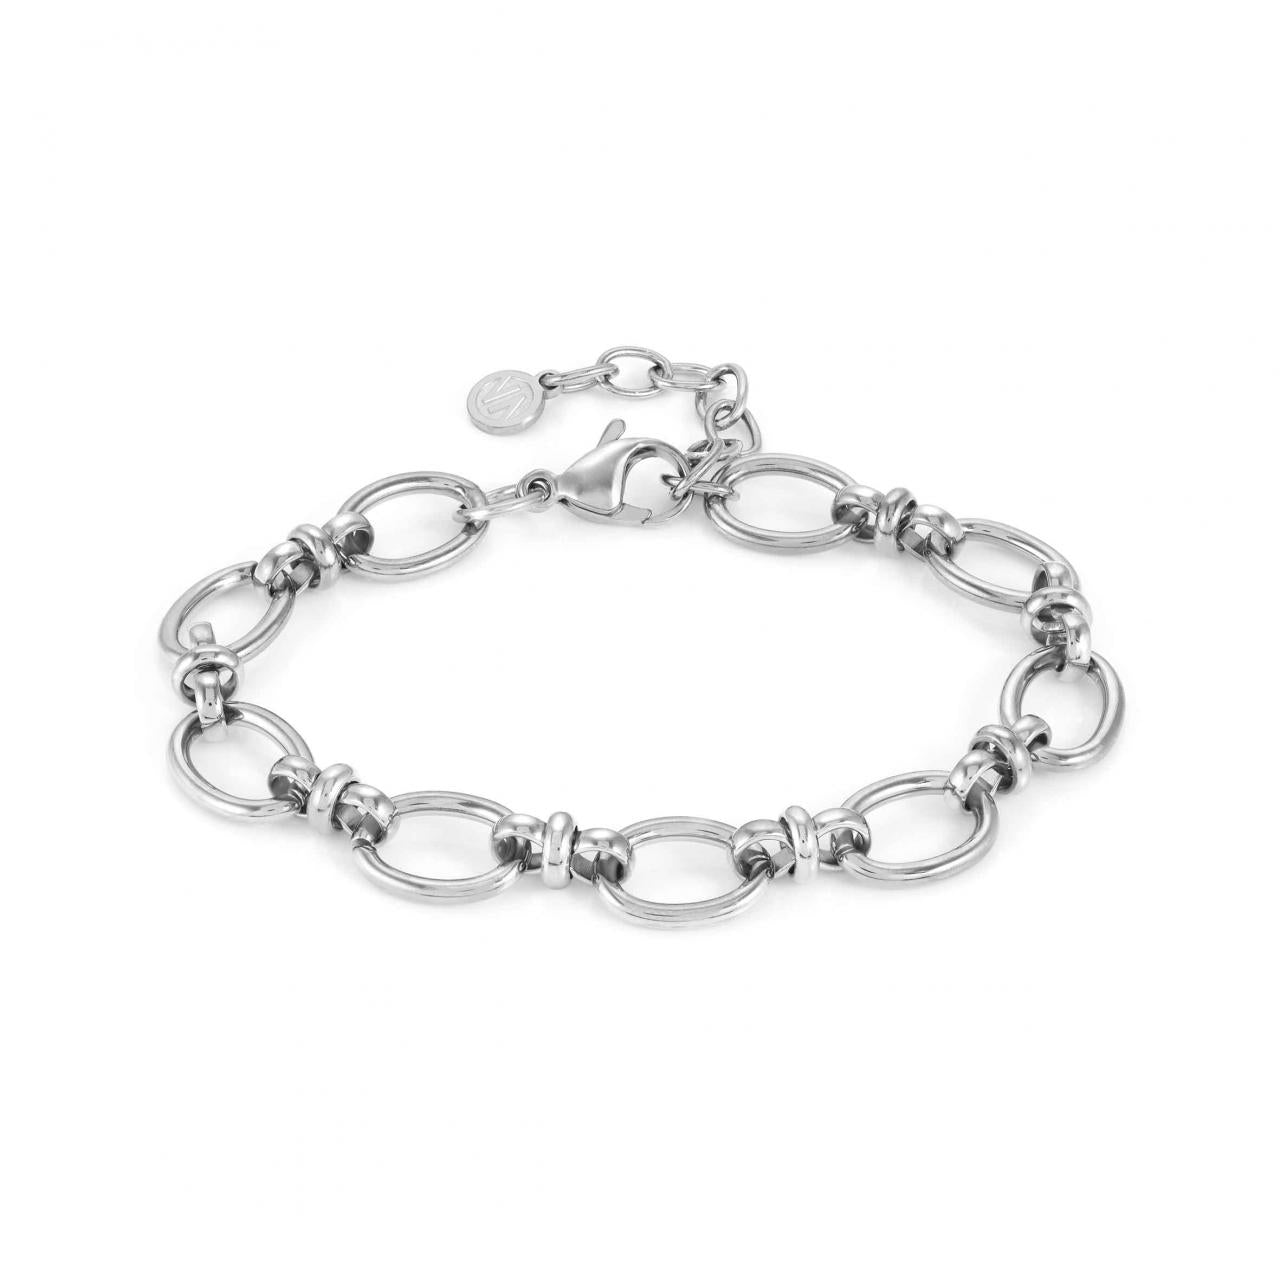 Affinity stainless steel chain link bracelet.